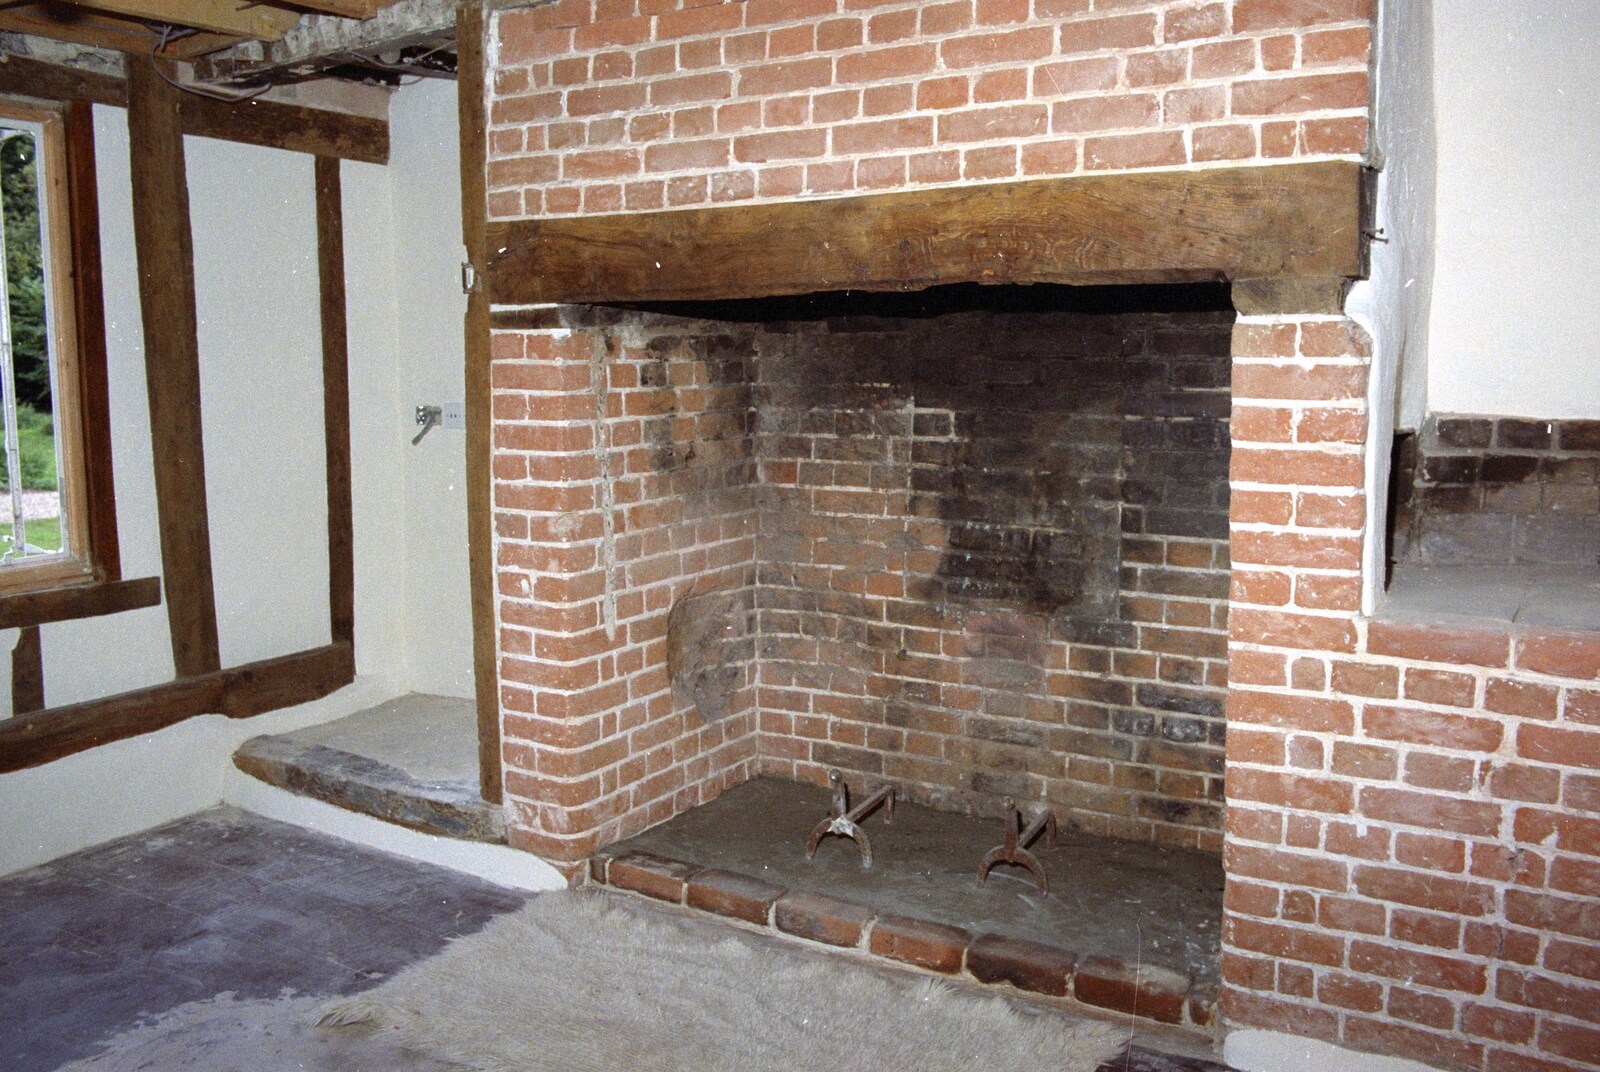 An empty fireplace from A Stripper at The Swan, Brome, Suffolk - 30th August 1994